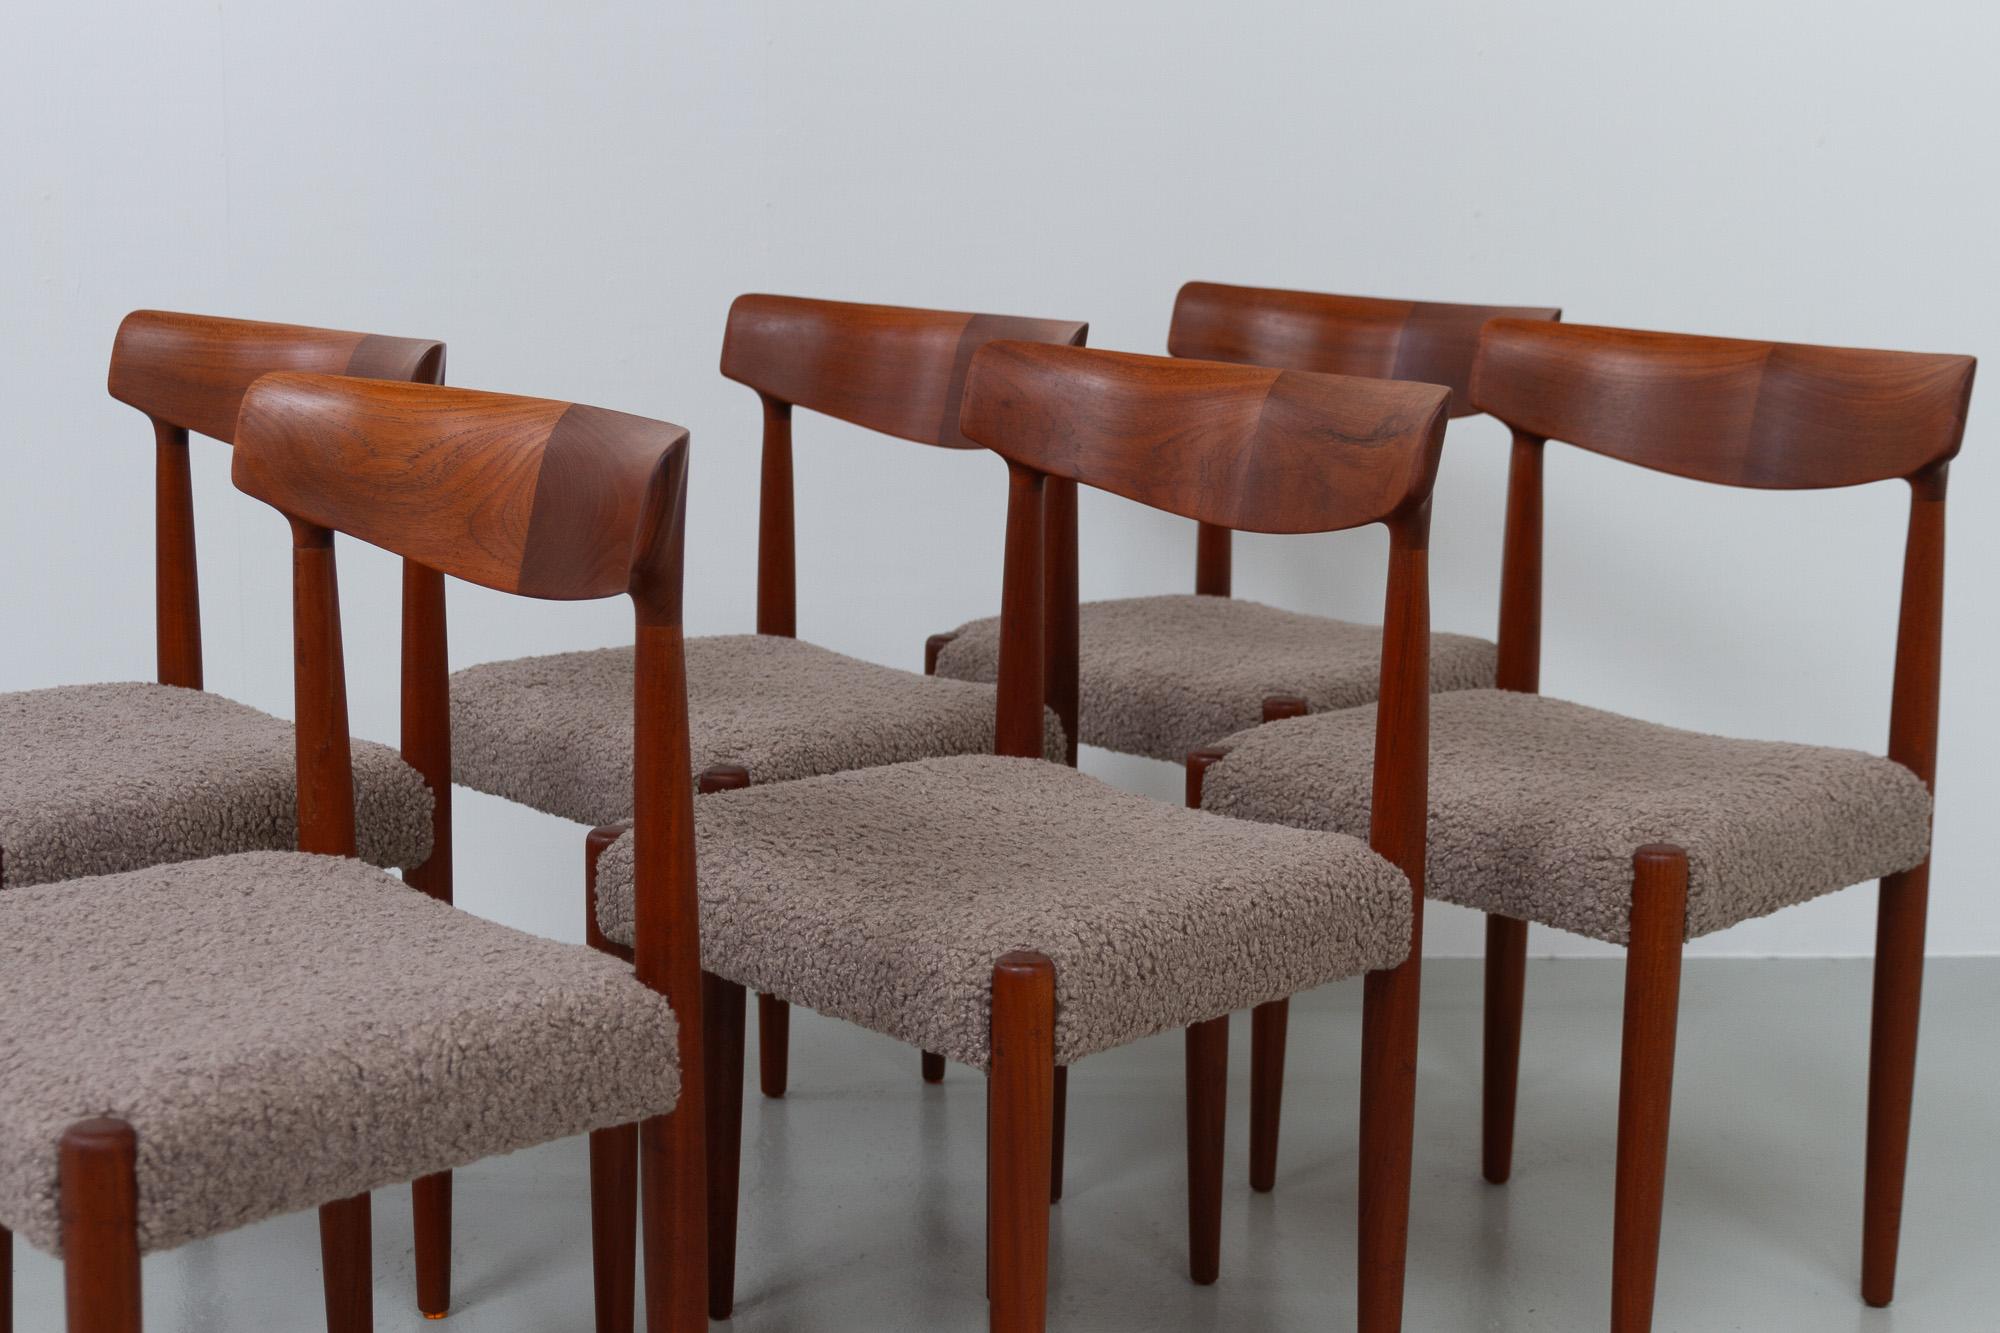 Danish Modern Teak Dining Chairs by Knud Færch for Slagelse, 1960s. Set of 6. In Good Condition For Sale In Asaa, DK